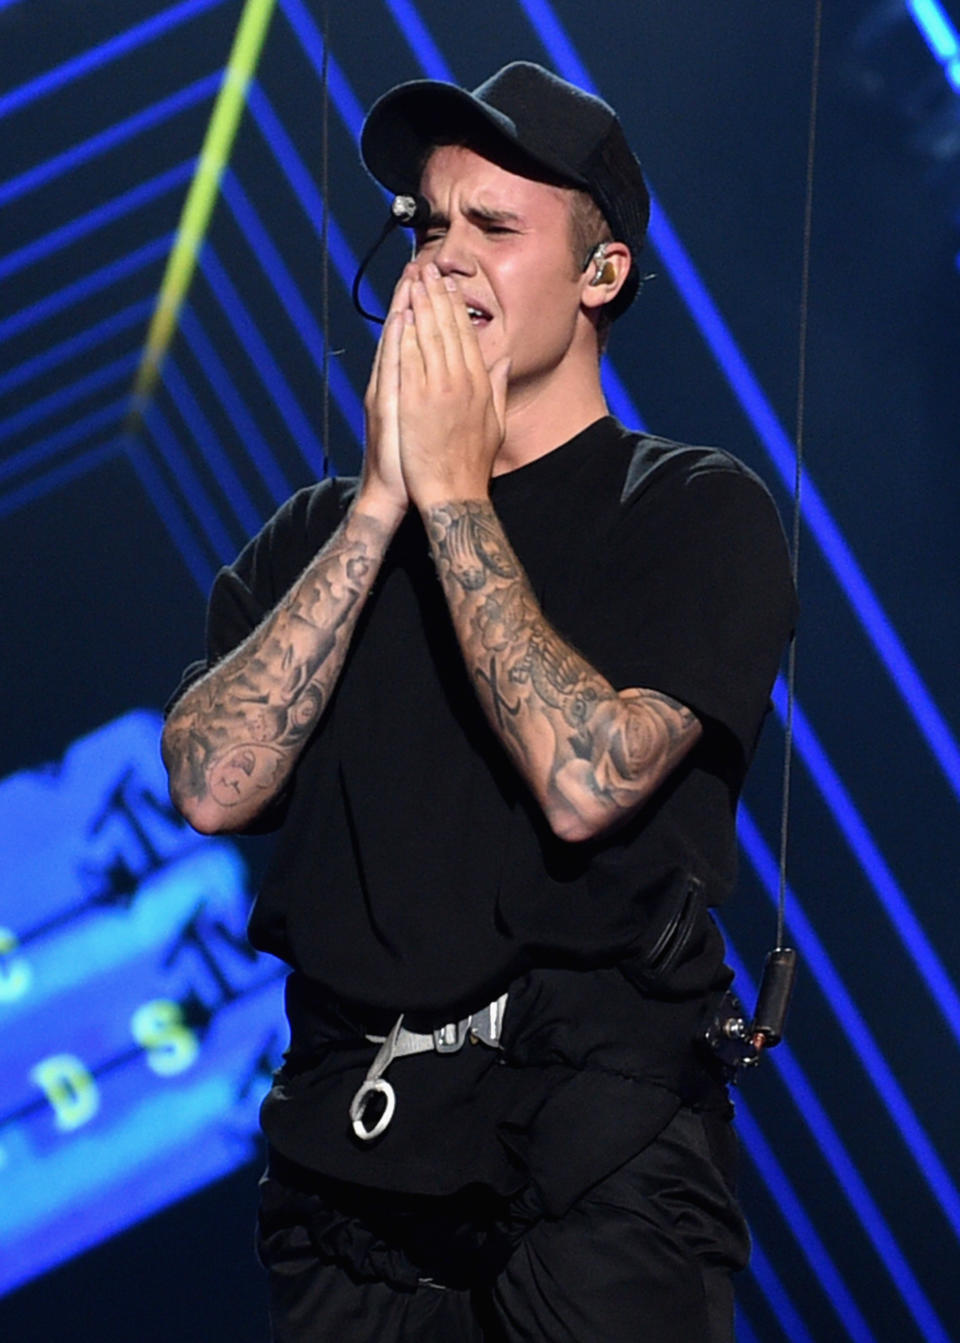 Justin Bieber emotionally performing on stage